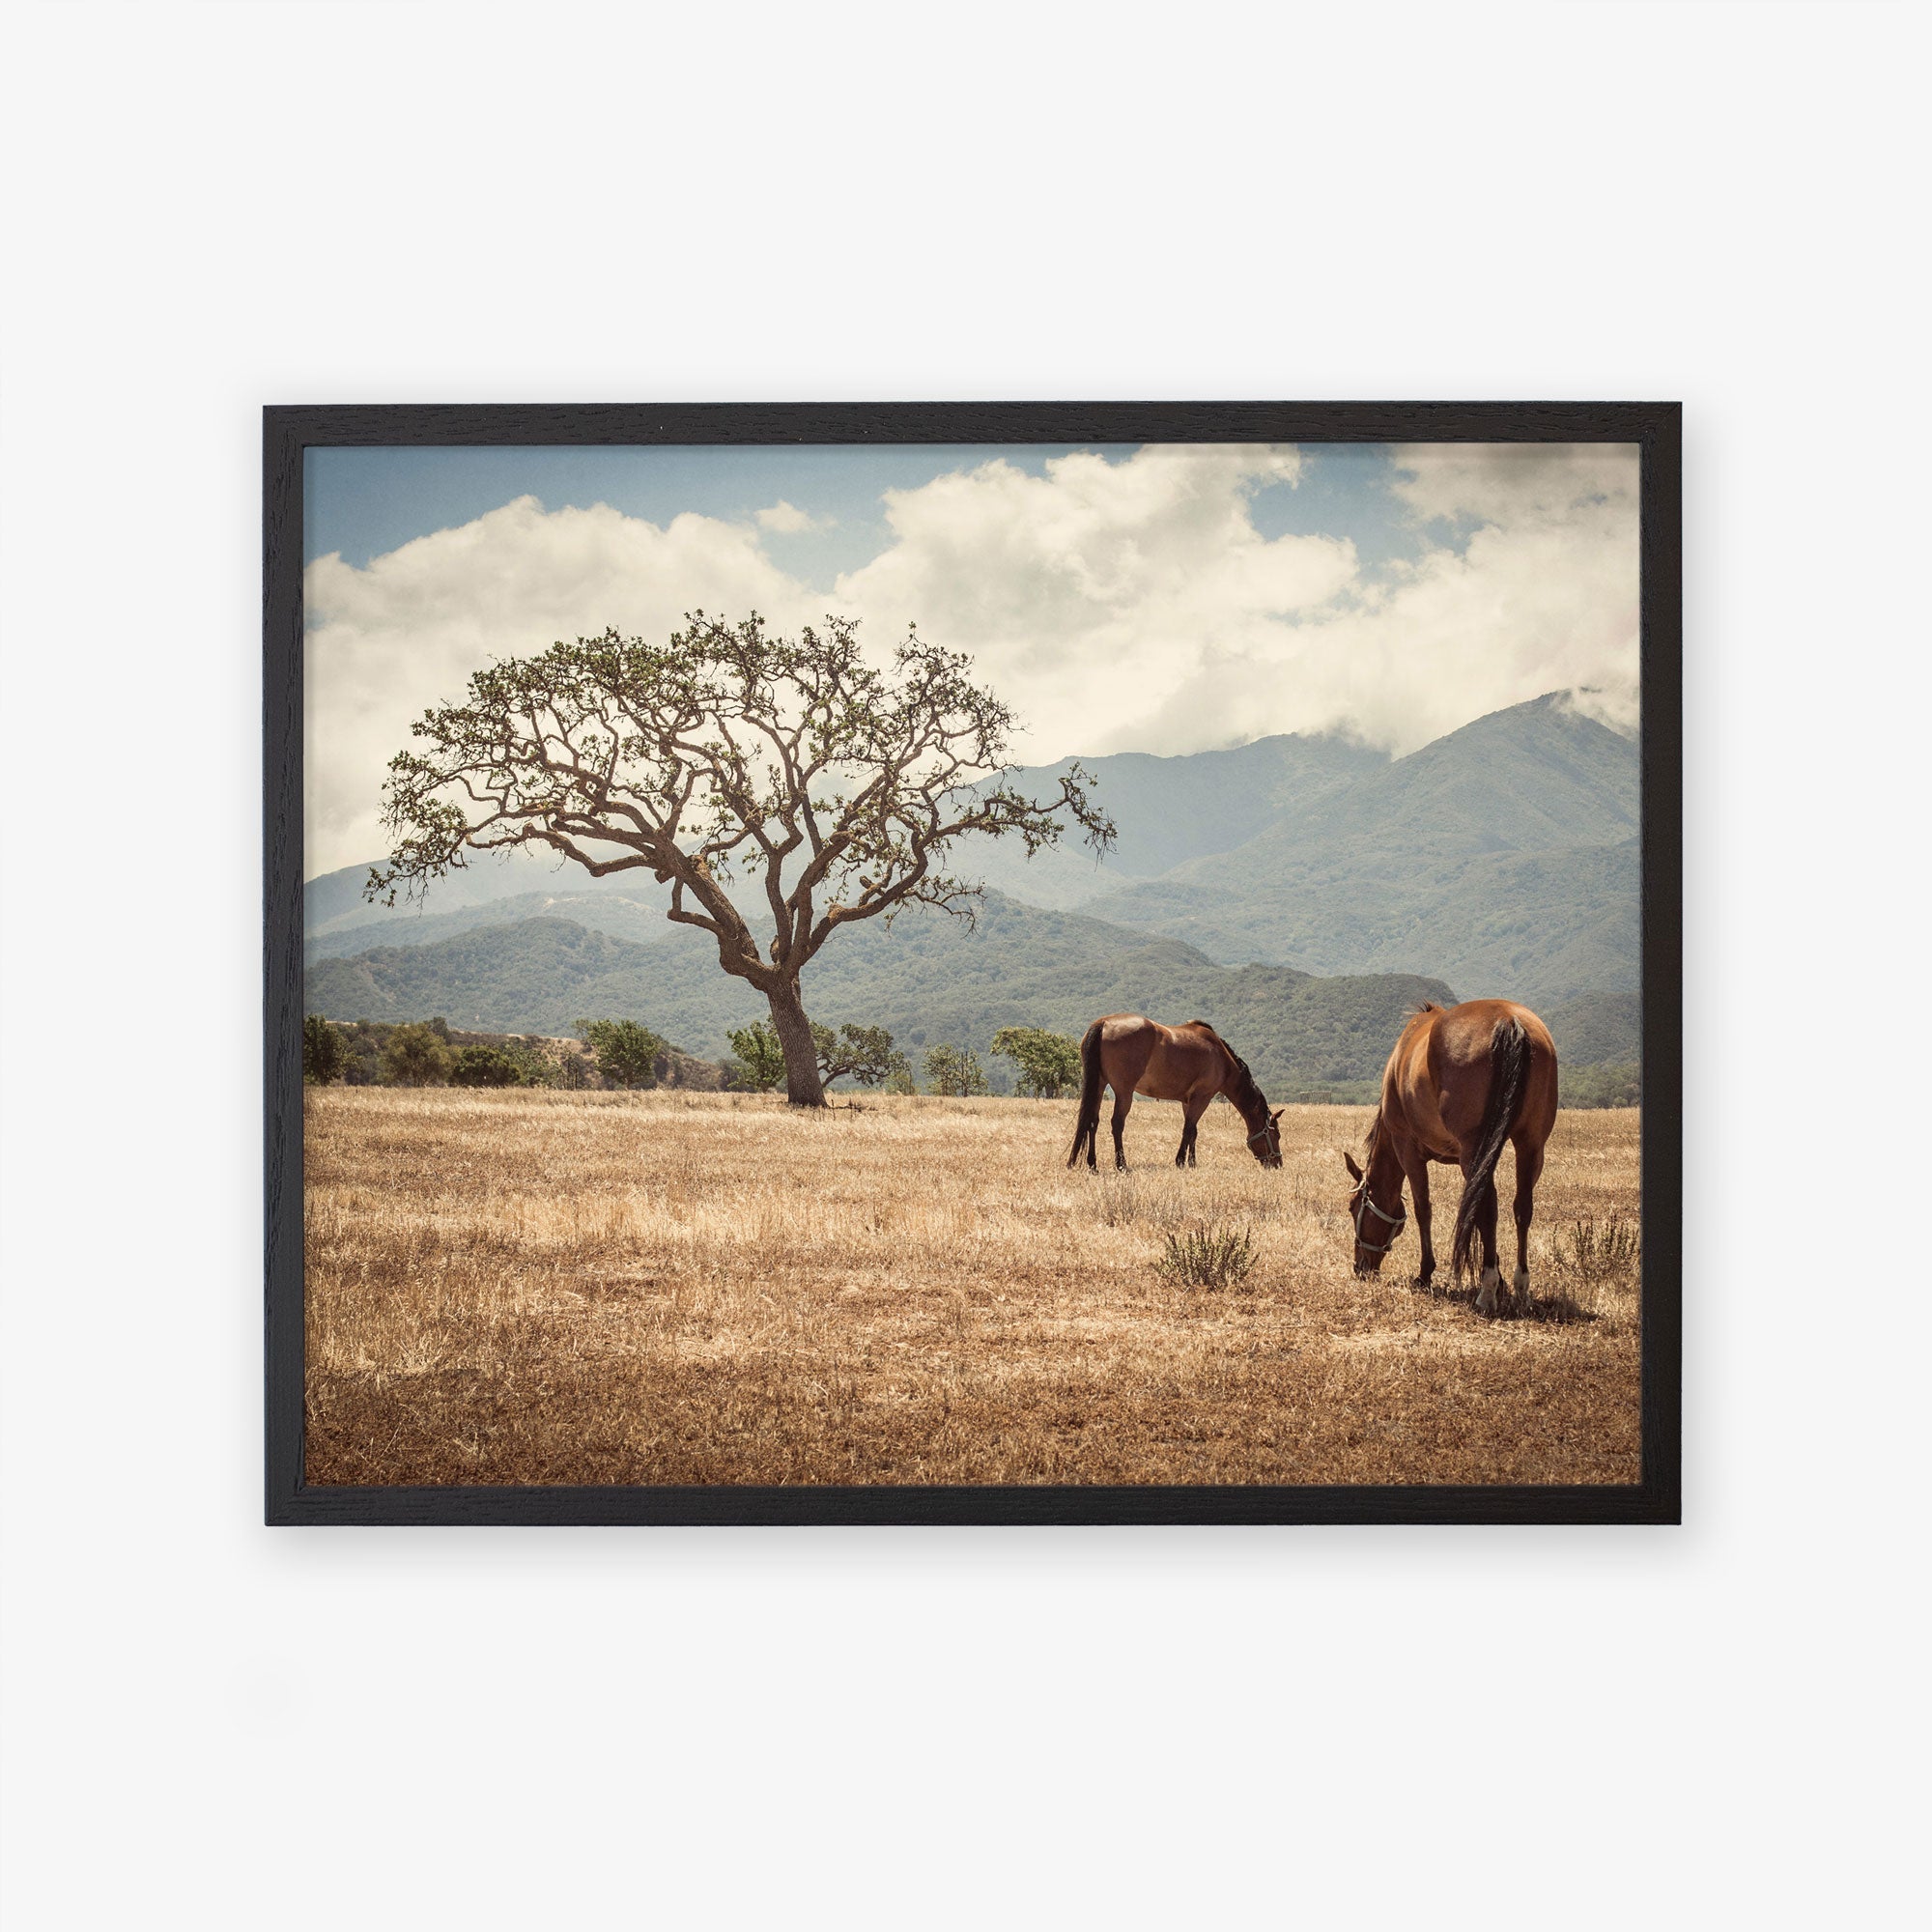 Framed photograph of Rustic Print of Horses in a Field, &#39;Santa Ynez Horses&#39; by Offley Green with mountains in the background.